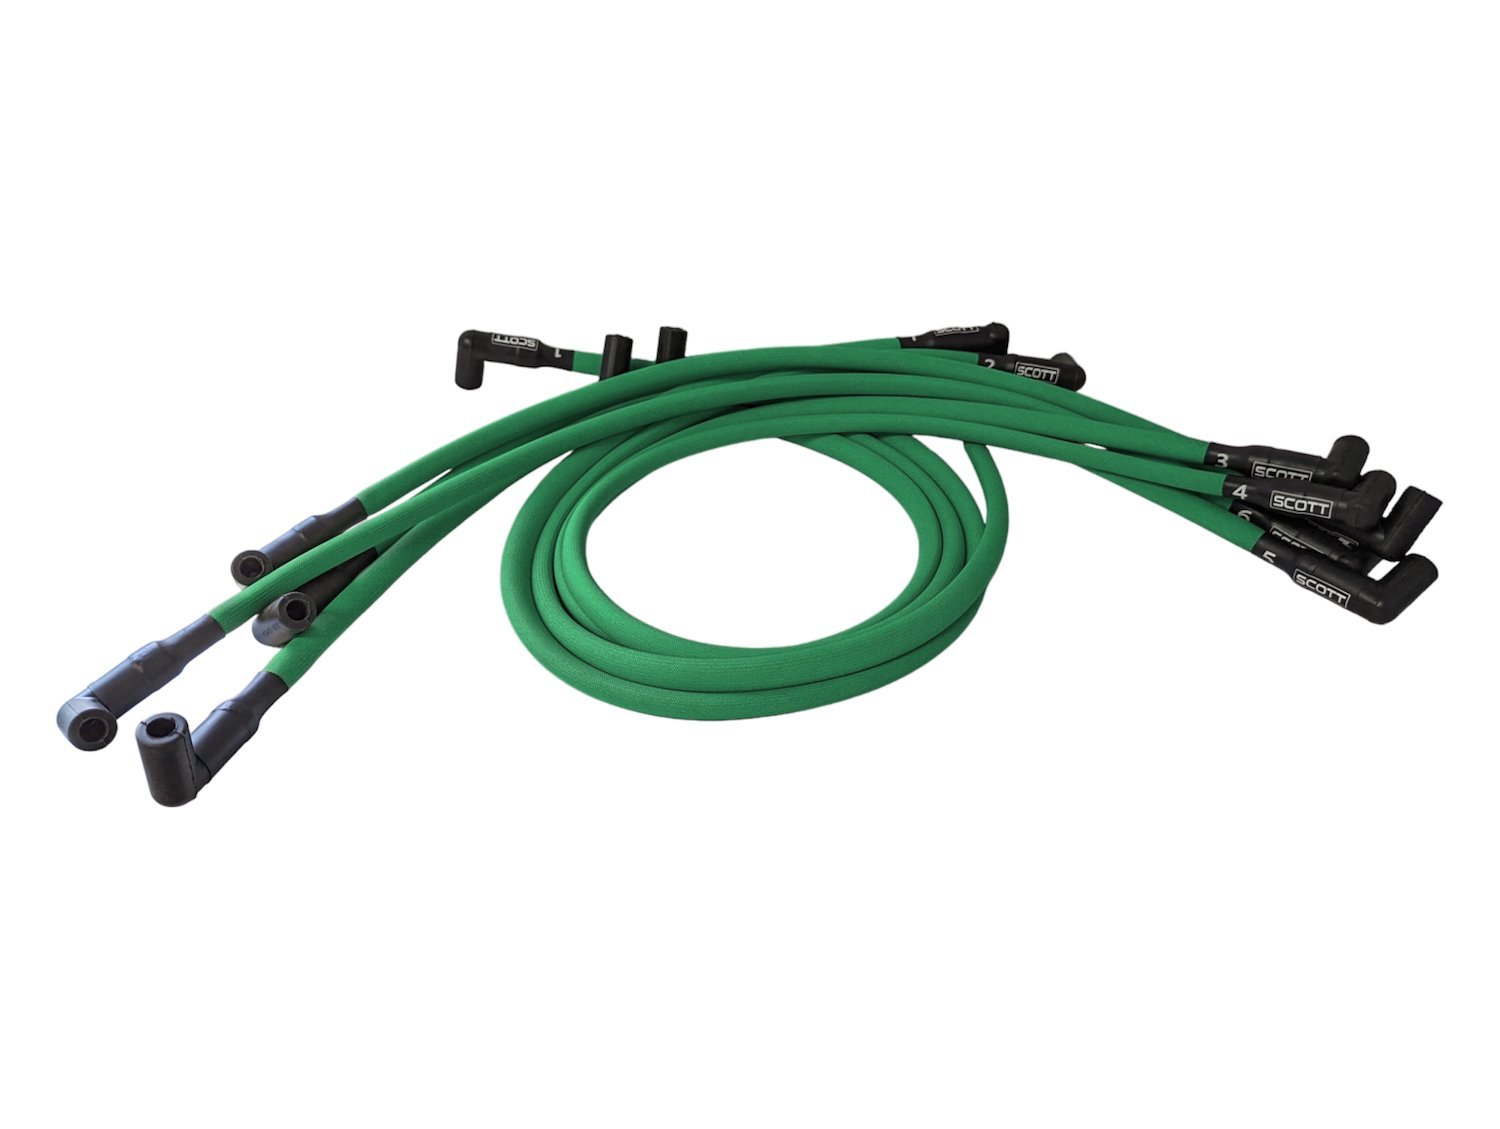 SPW-PS-407-4 High-Performance Fiberglass-Oversleeved Spark Plug Wire Set for Small Block Chevy, Under Header [Green]